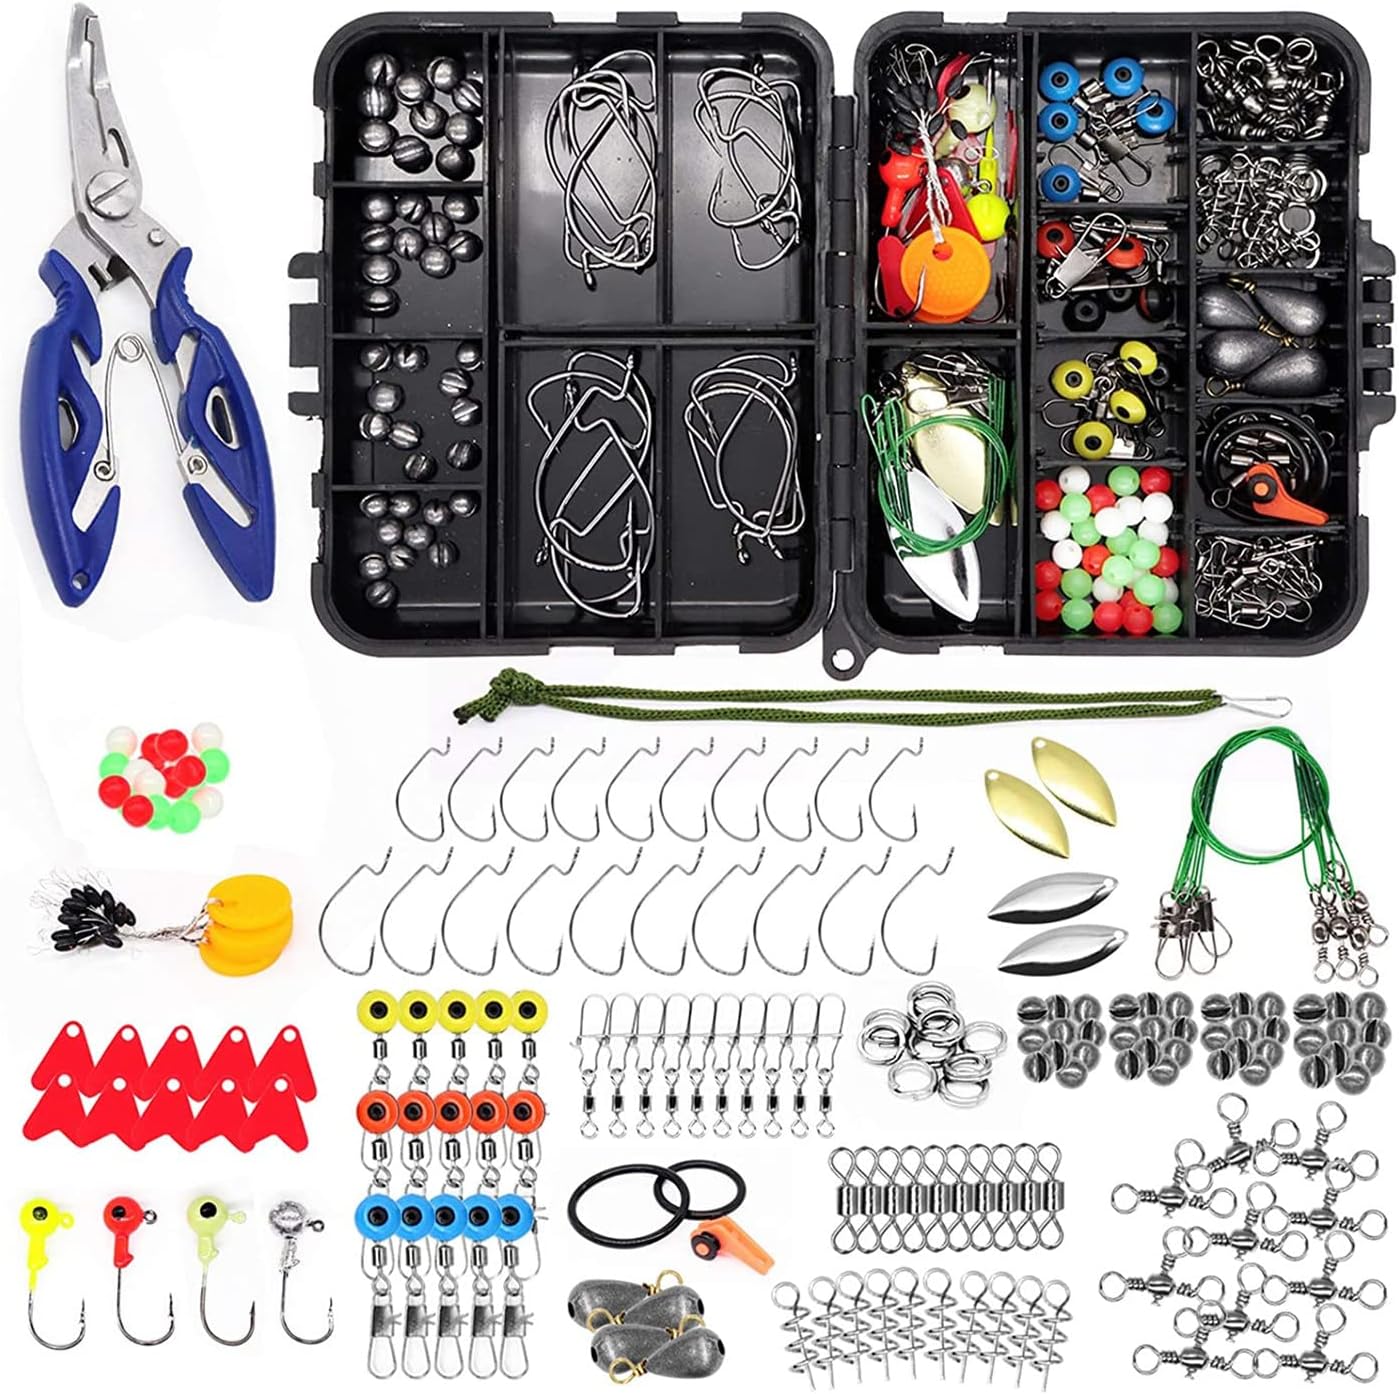 Fishing Accessories Kit【188PCS】 Set with Tackle Box, Including Pliers, Jig  Hooks, Bullet Bass Casting, Swivels